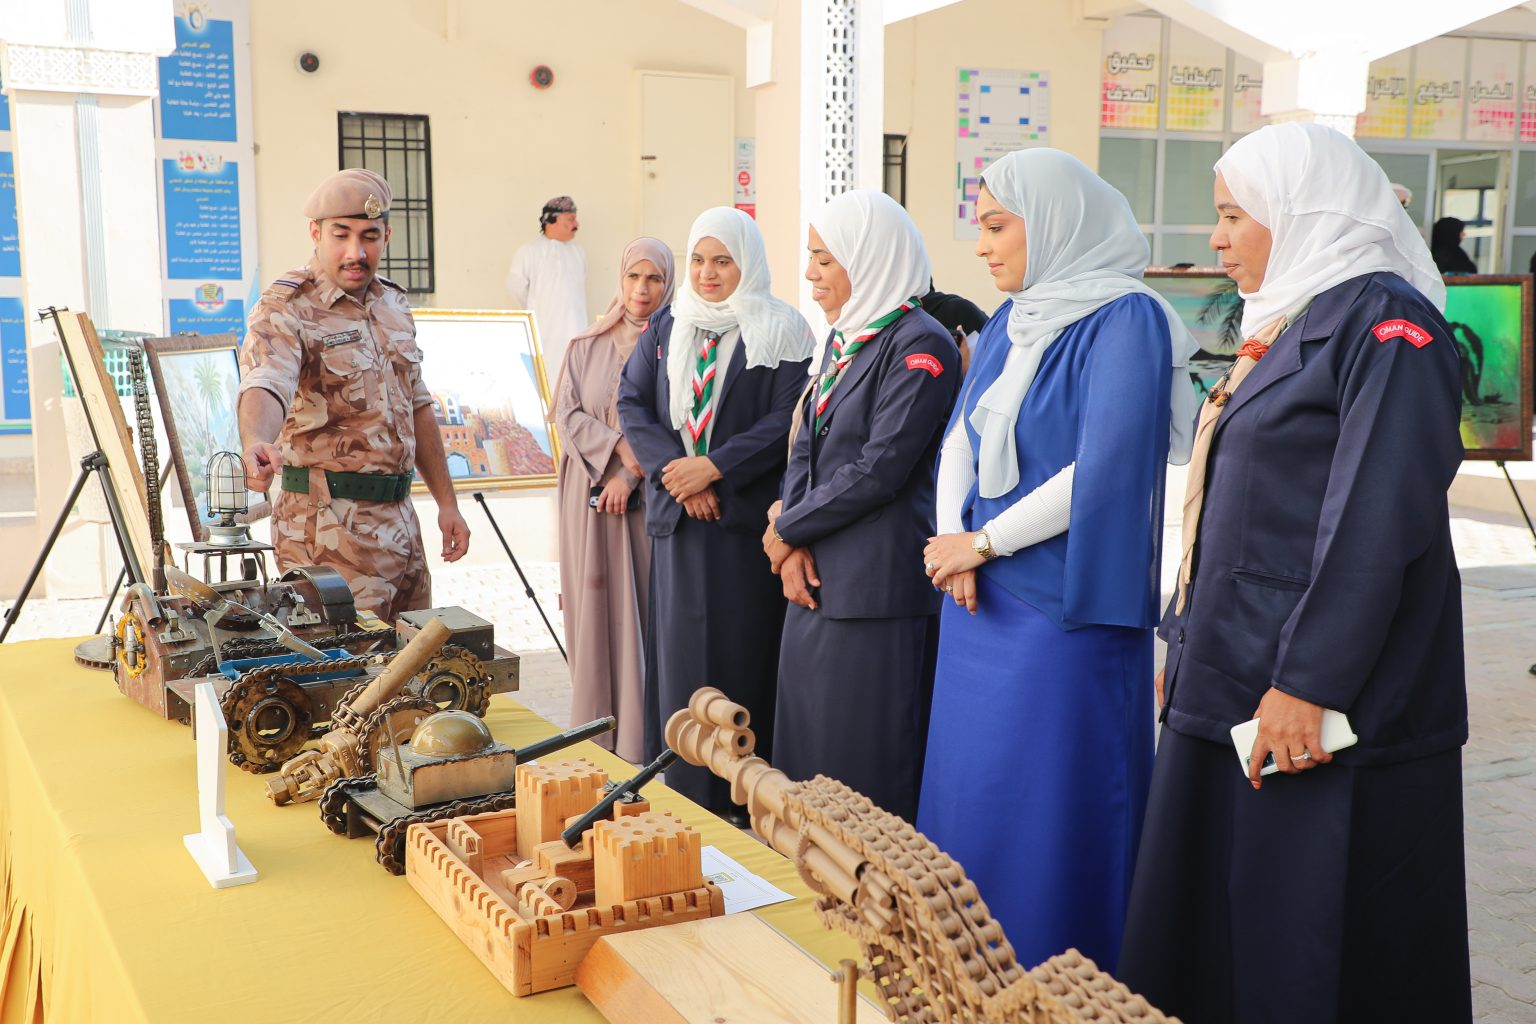 MTC Participates in the Exhibition Held at One of the Local Schools